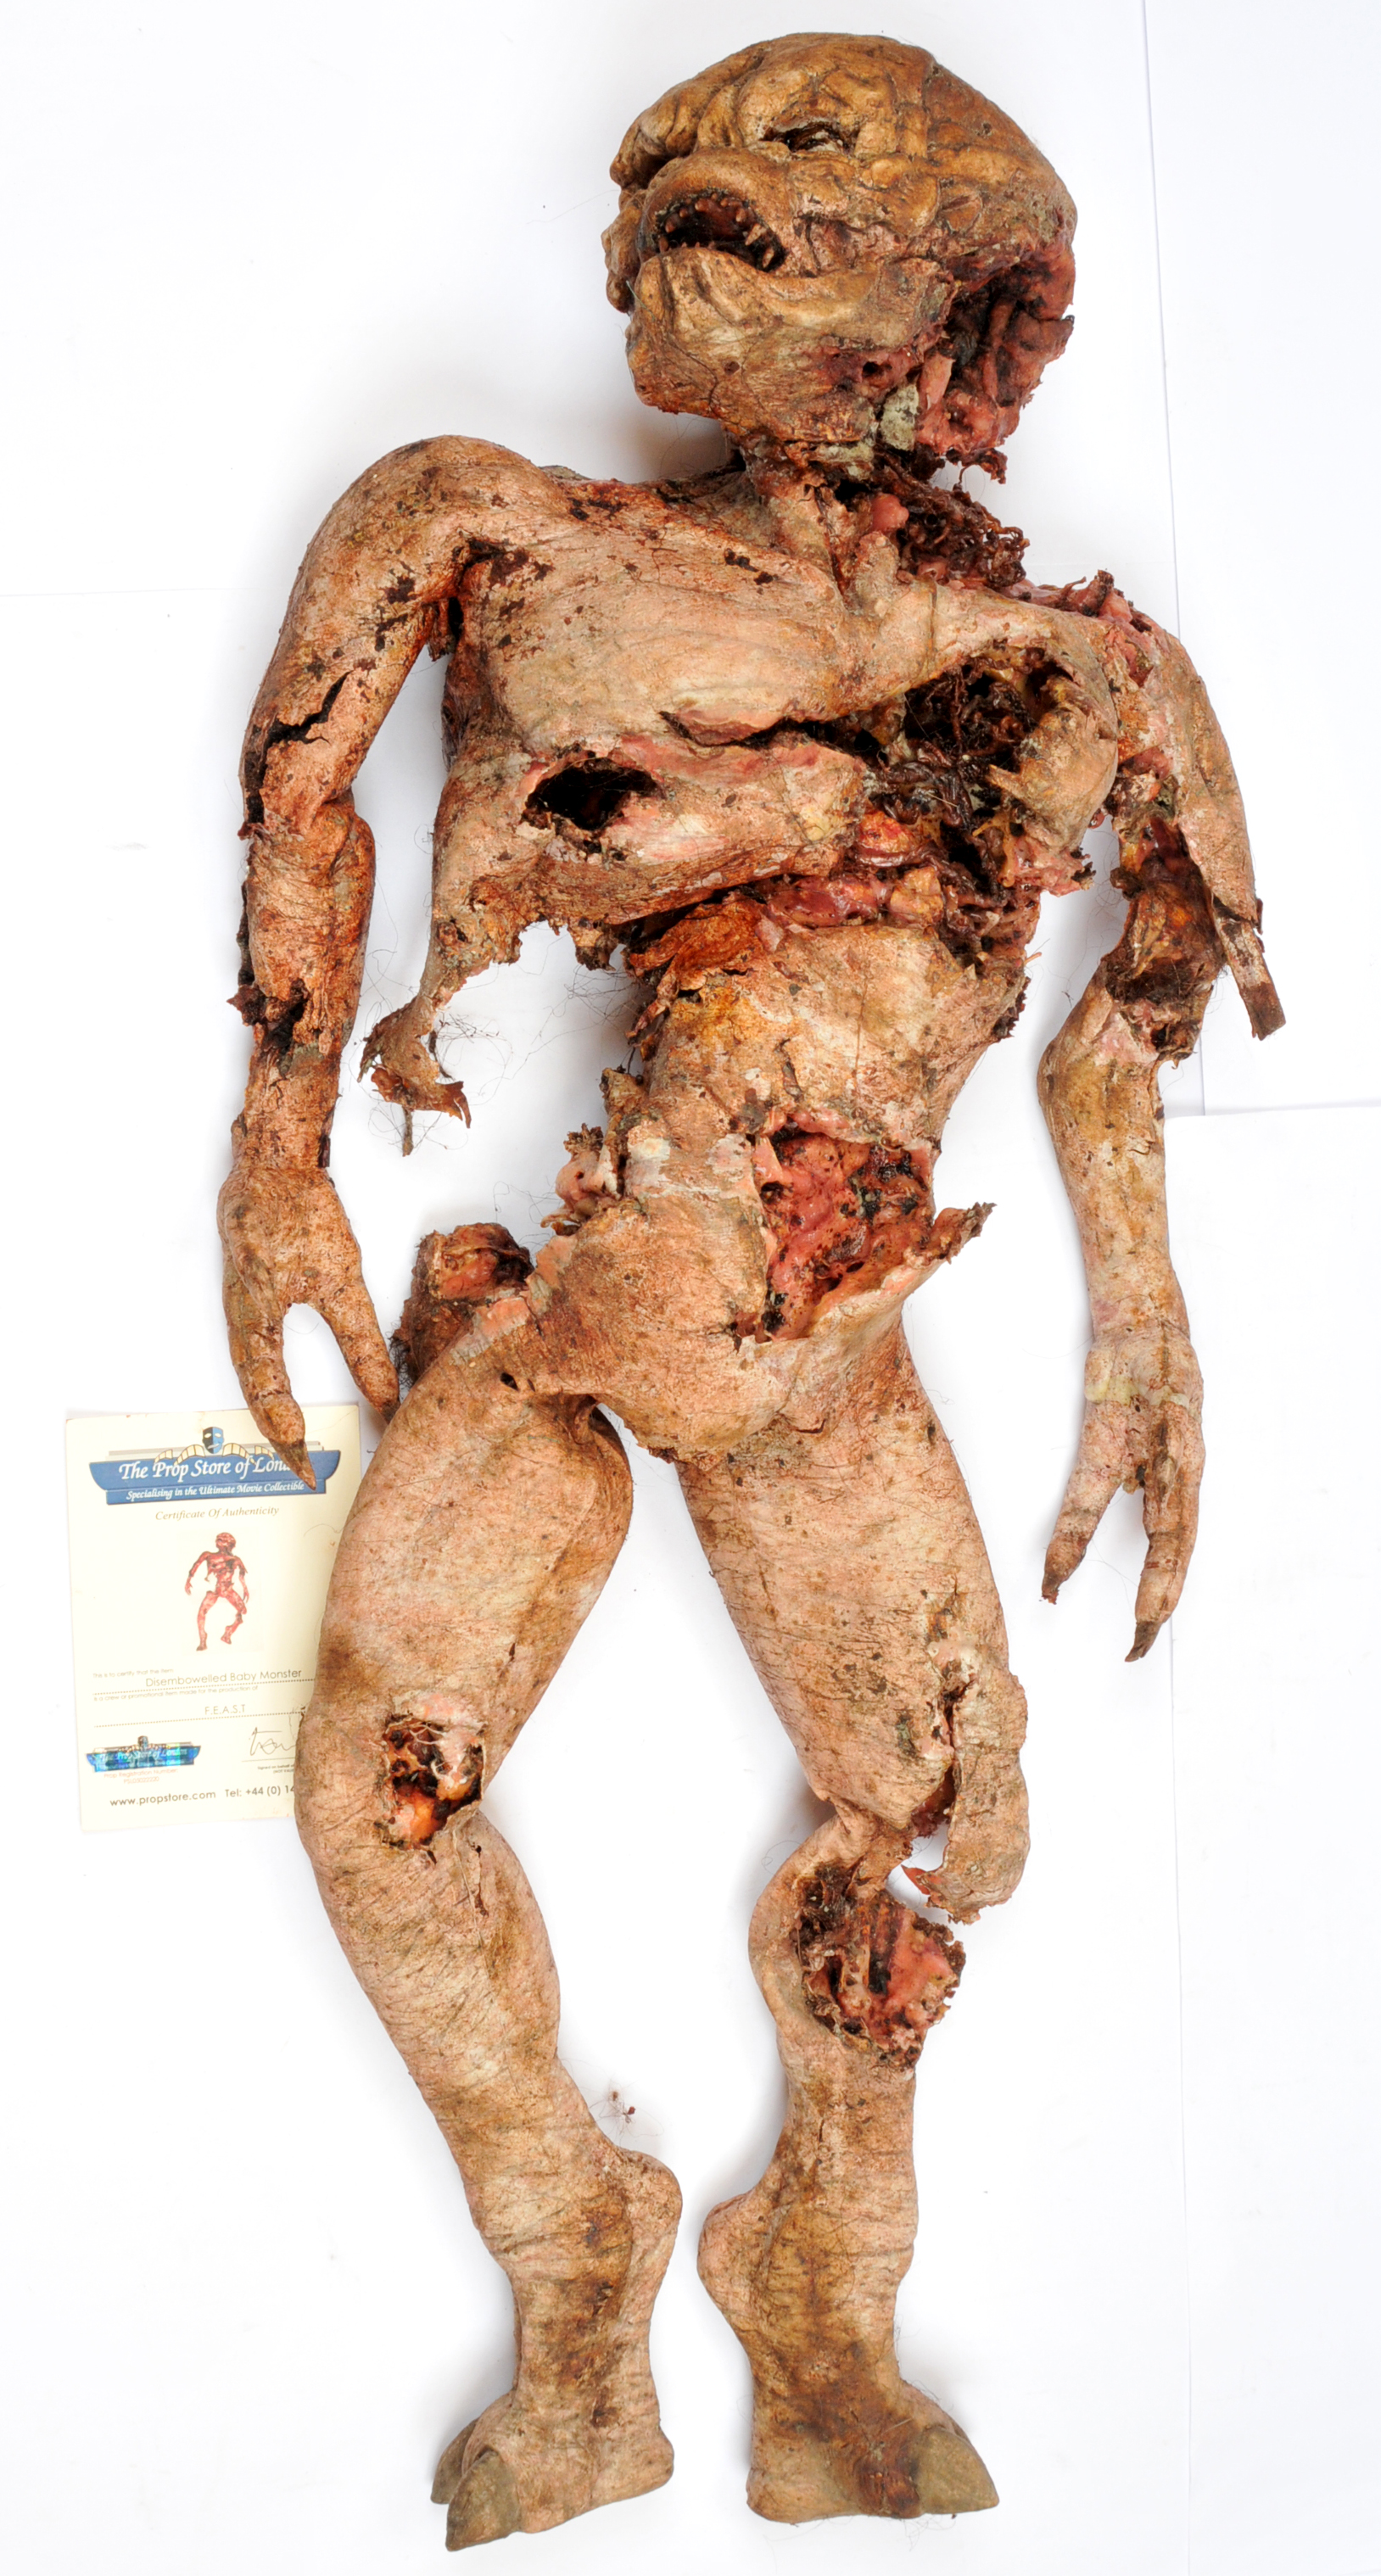 Disembowelled Baby Monster Prop used in the production of the Horror Movie F.E.A.S.T